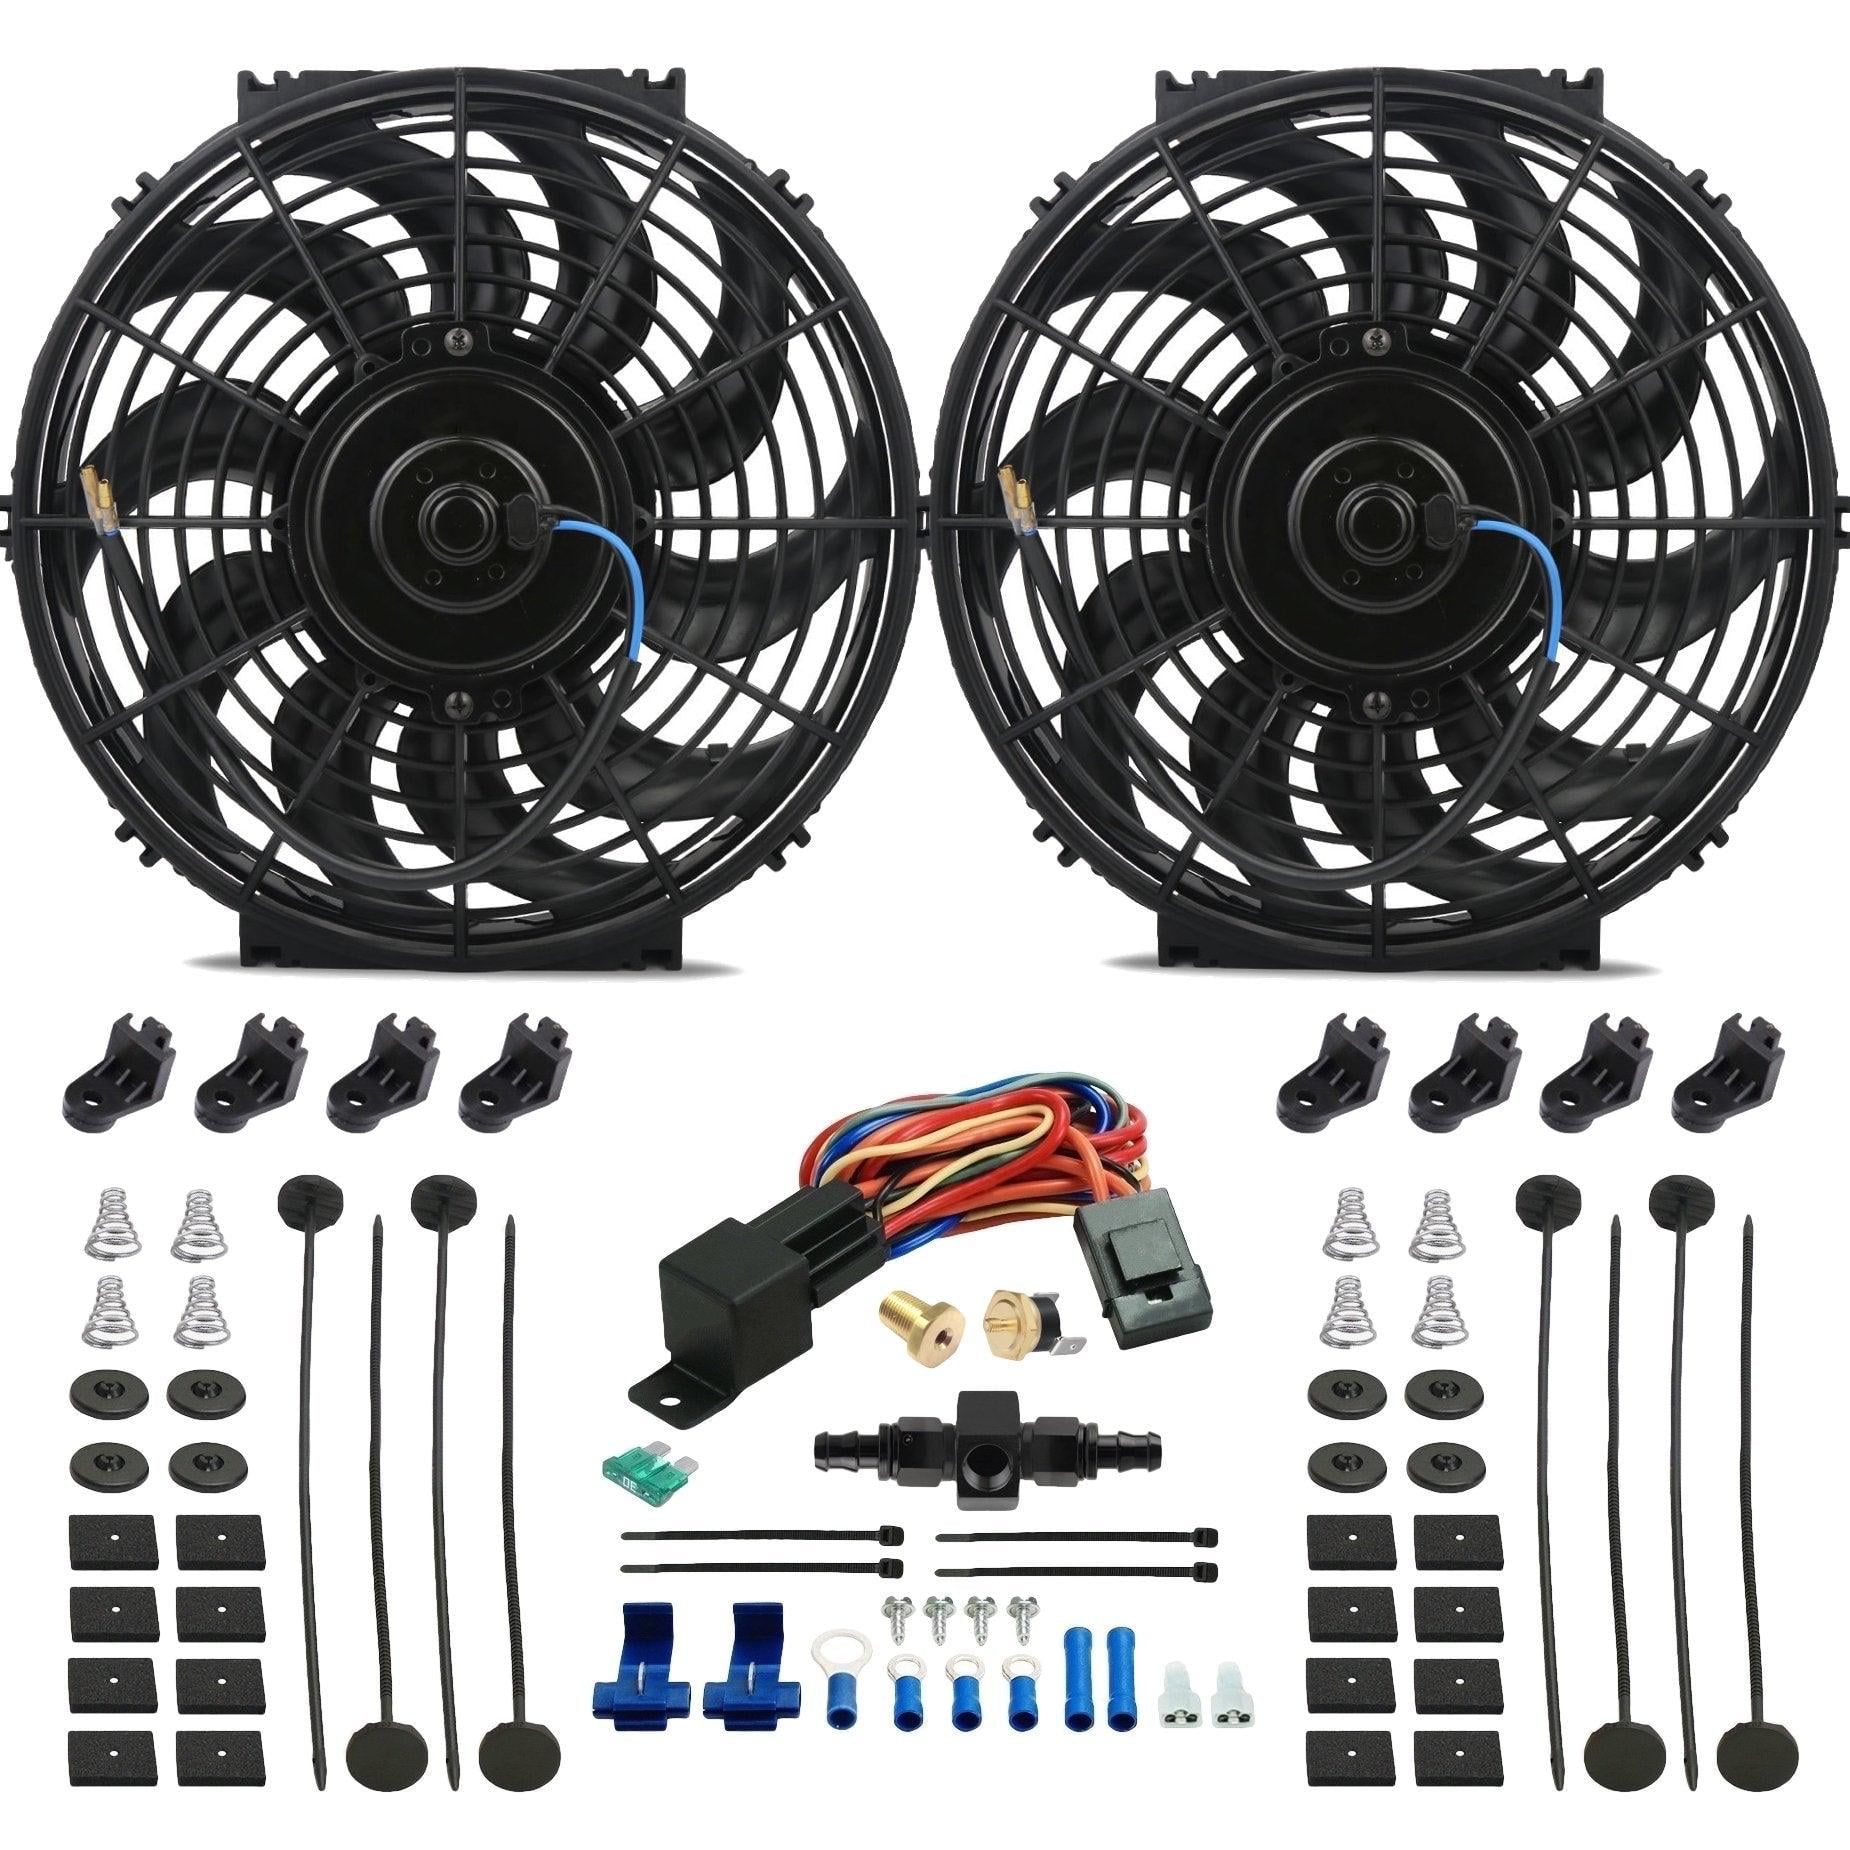 Dual 12-13 Inch 130w Electric Radiator Fans In-Hose Thermostat Switch Kit 